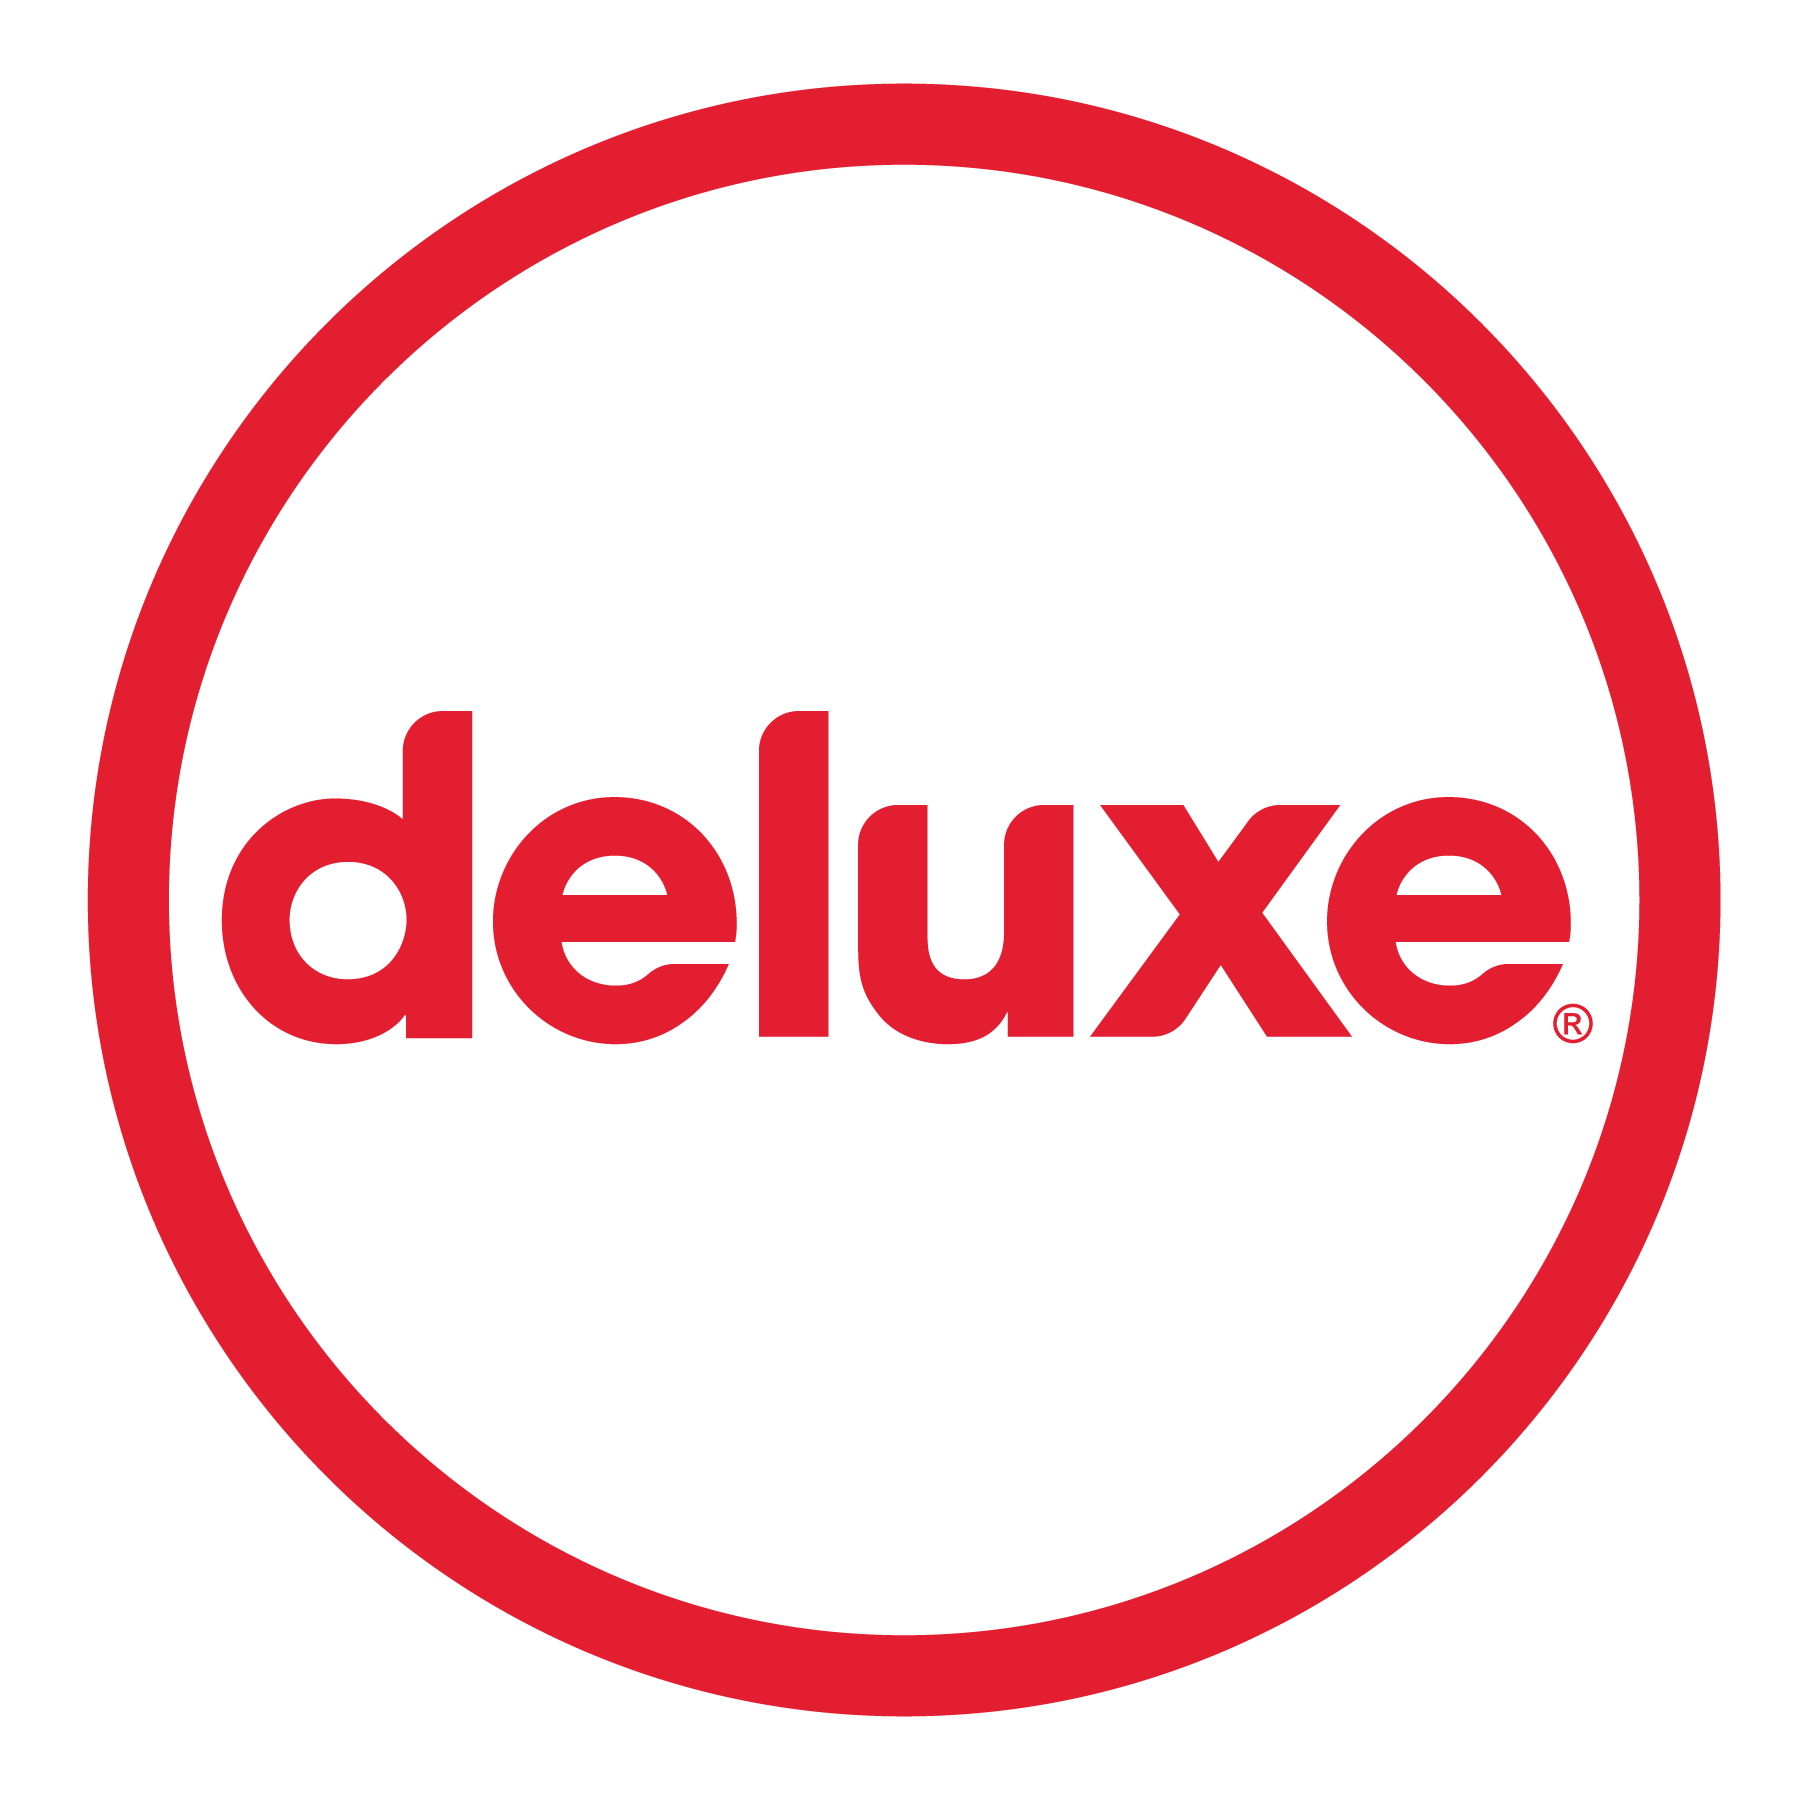 Deluxe Logo - File:Deluxe Logo 2016 Red.png - Wikimedia Commons